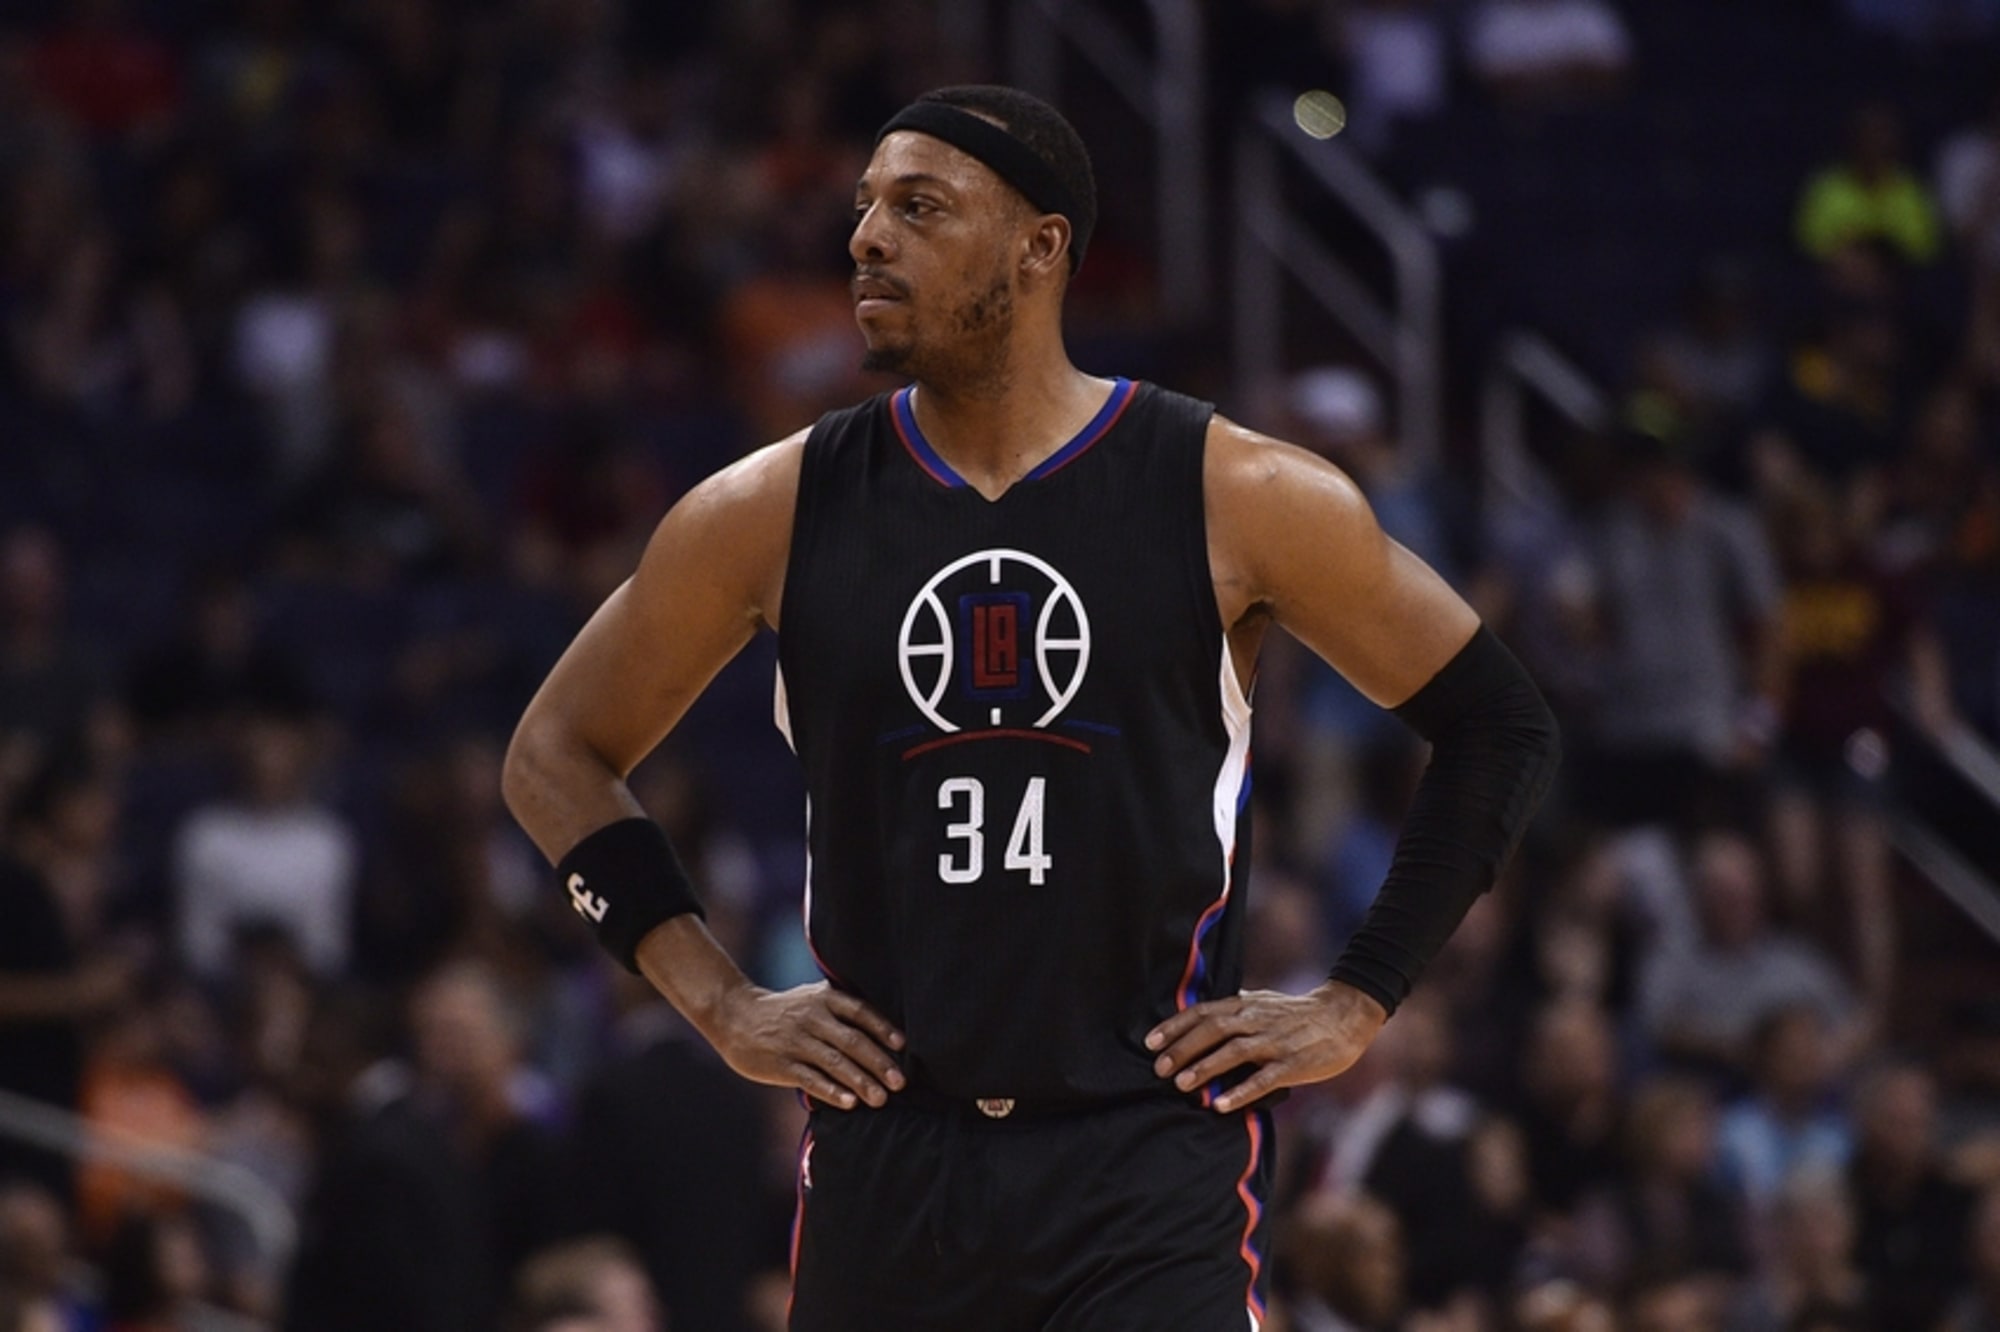 Paul Pierce would fit in nicely with Clippers next season - KU Sports